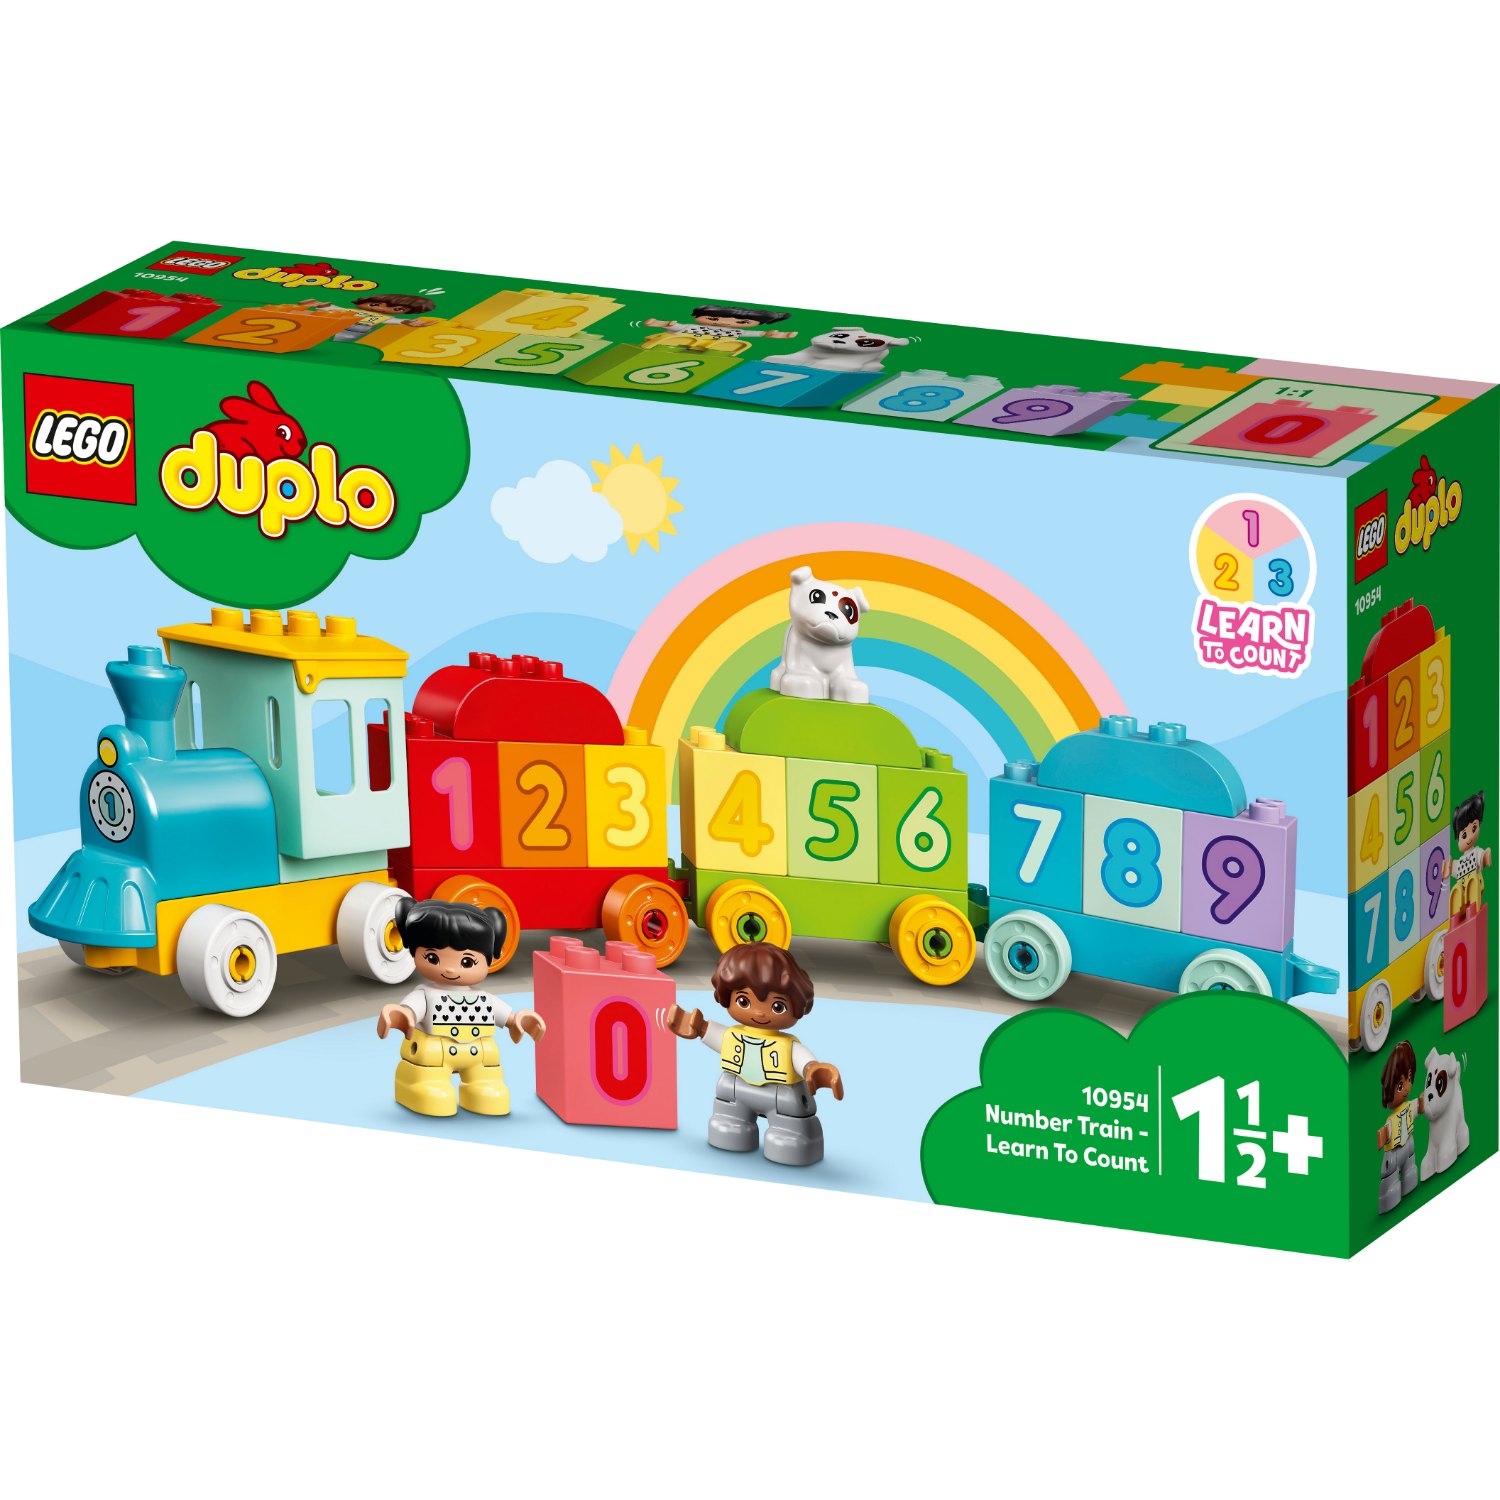 Lego Duplo 10954 Number Train – Learn To Count